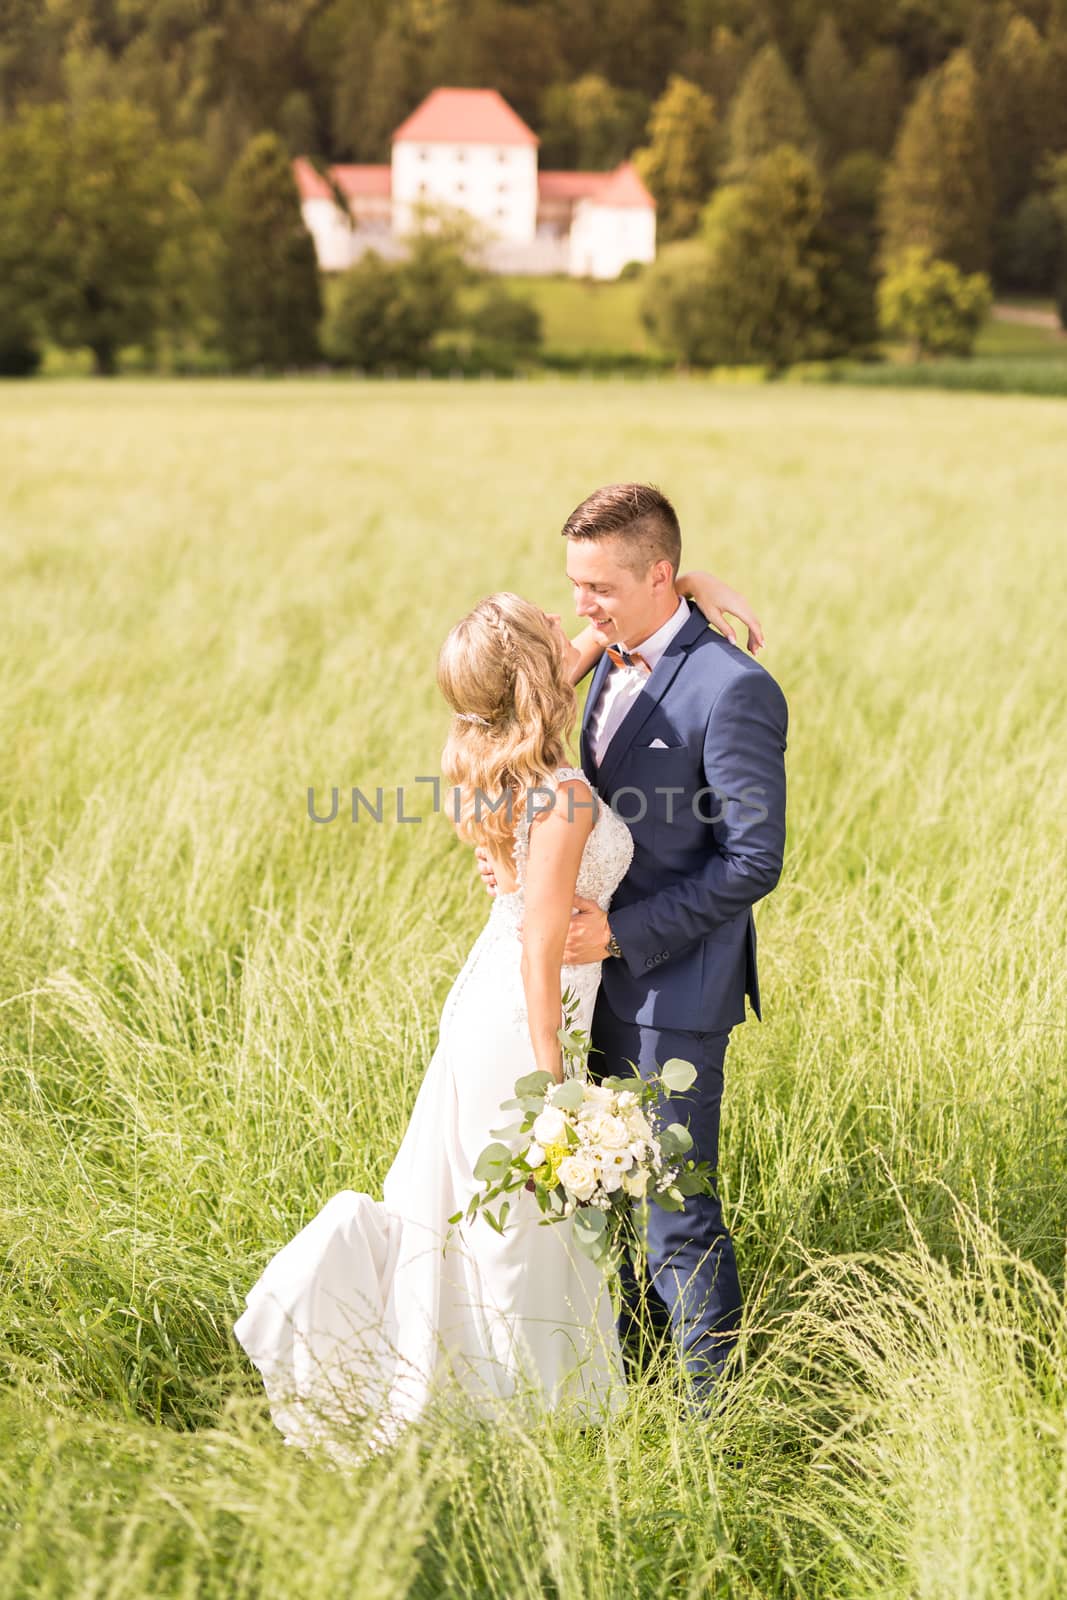 Newlyweds hugging tenderly in meadow in front of Strmol castle in Slovenian countryside. Caucasian happy romantic newlyweds celebrating their marriage.